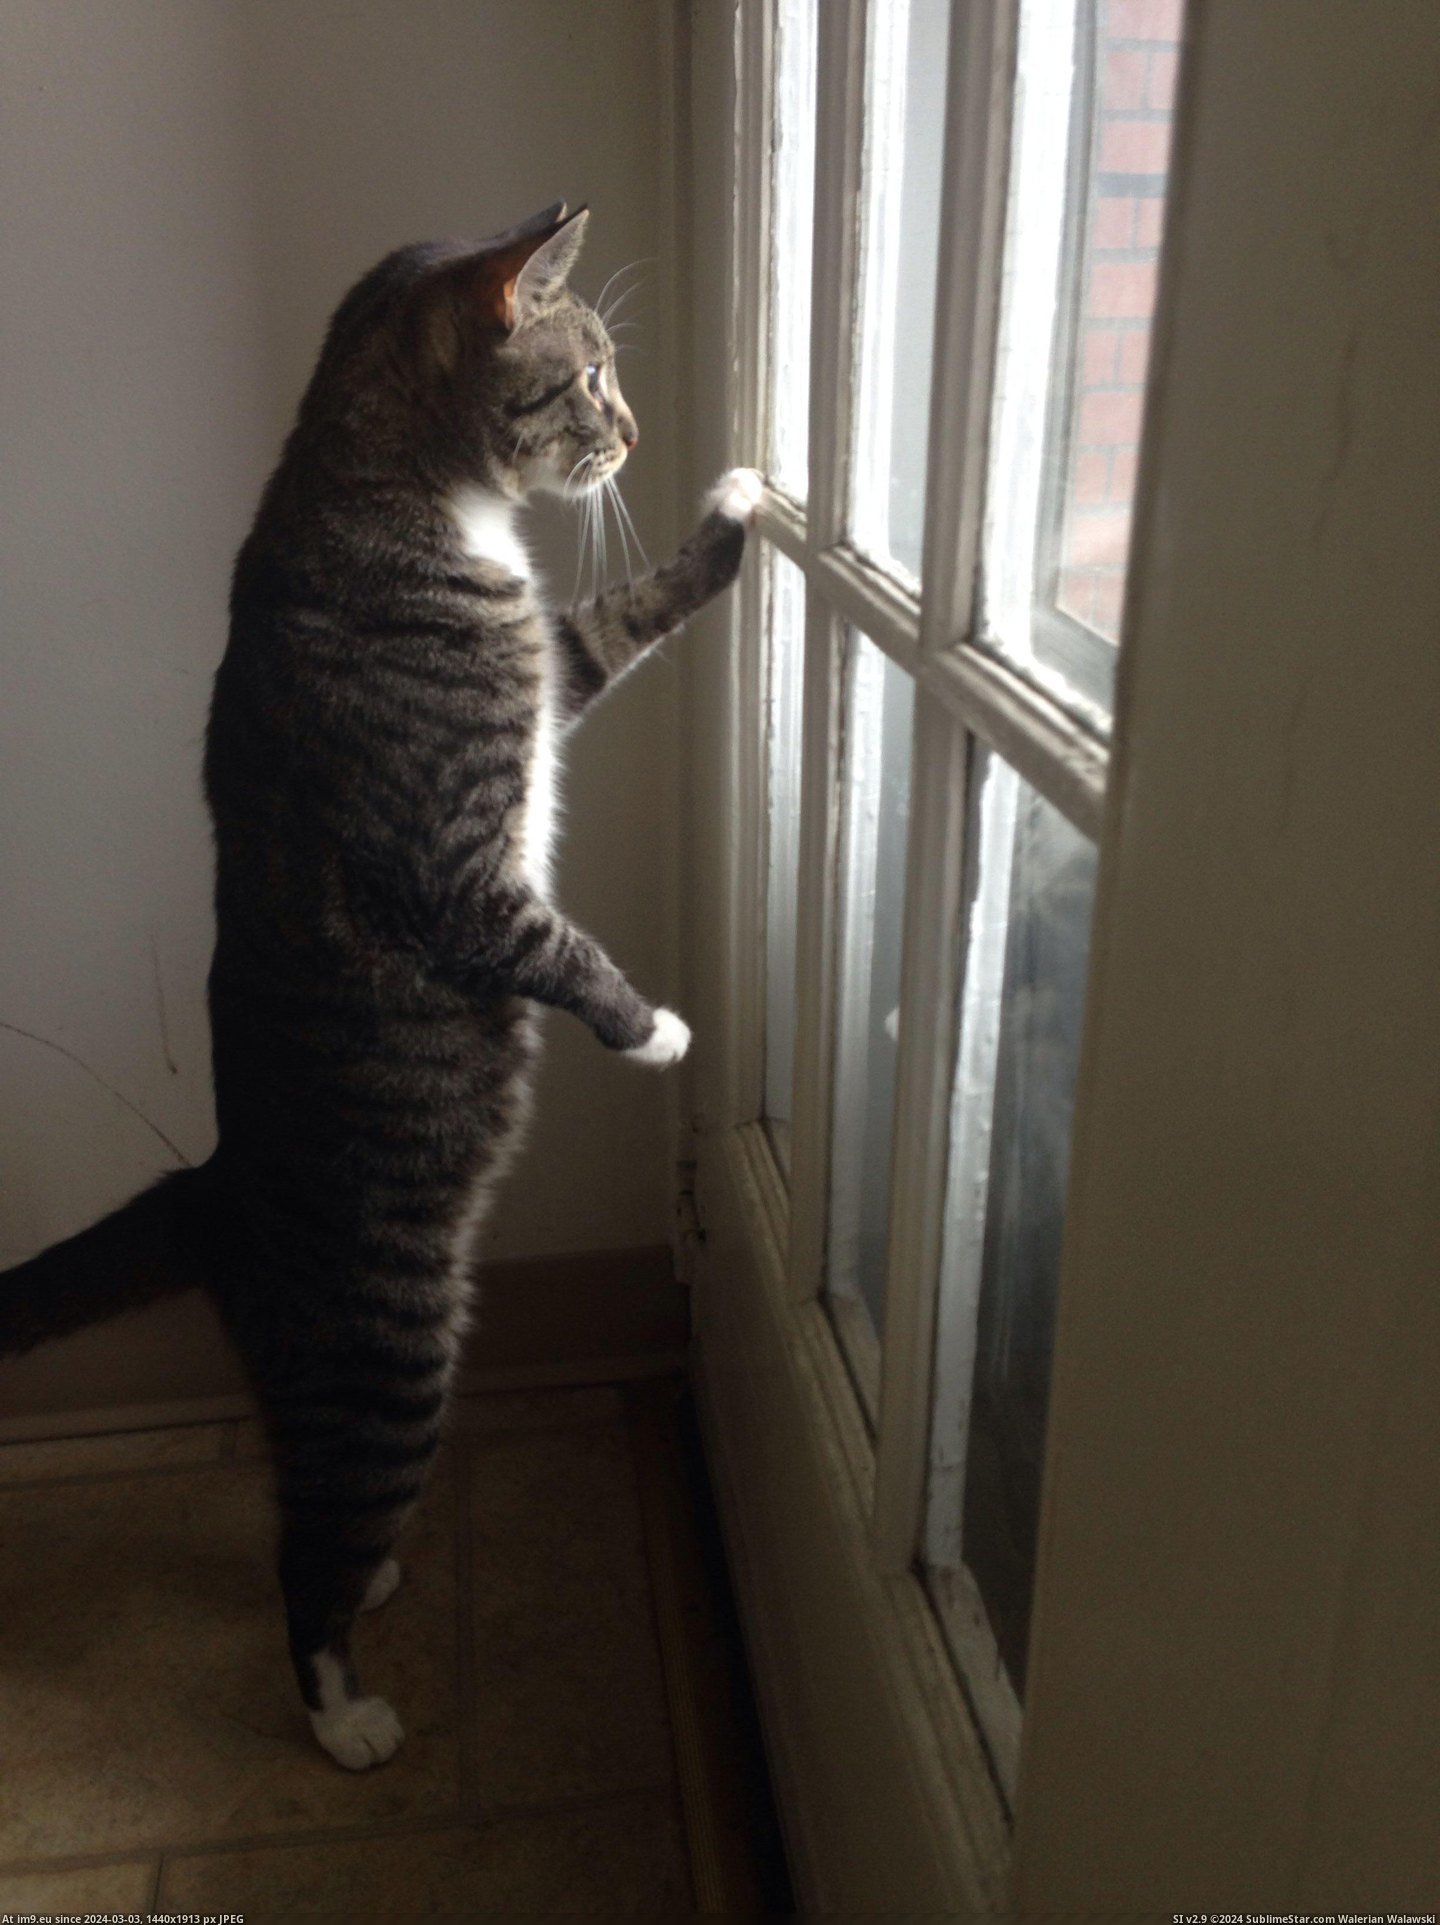 #Work #Wife #Watches #Misses #Indy #Morning #Leave [Aww] Indy watches my wife leave for work every morning. I think he misses her when she's gone. Pic. (Изображение из альбом My r/AWW favs))